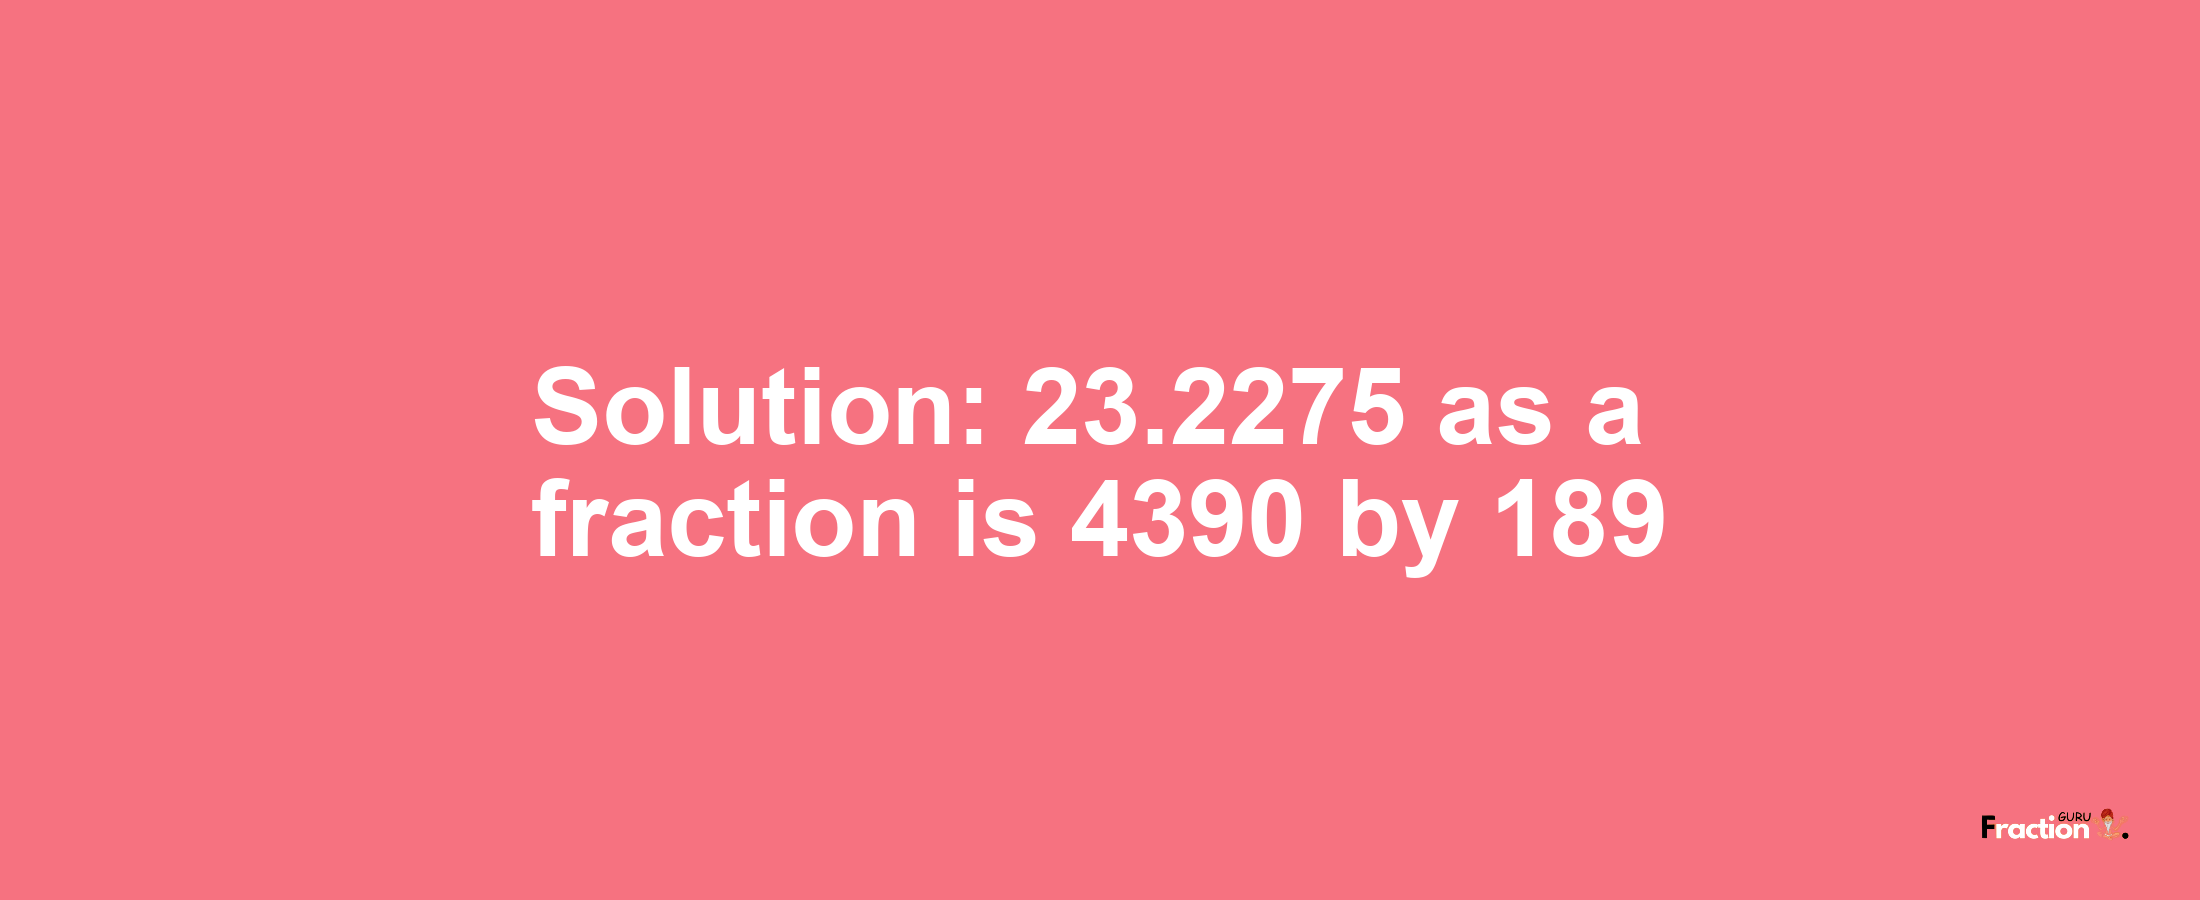 Solution:23.2275 as a fraction is 4390/189